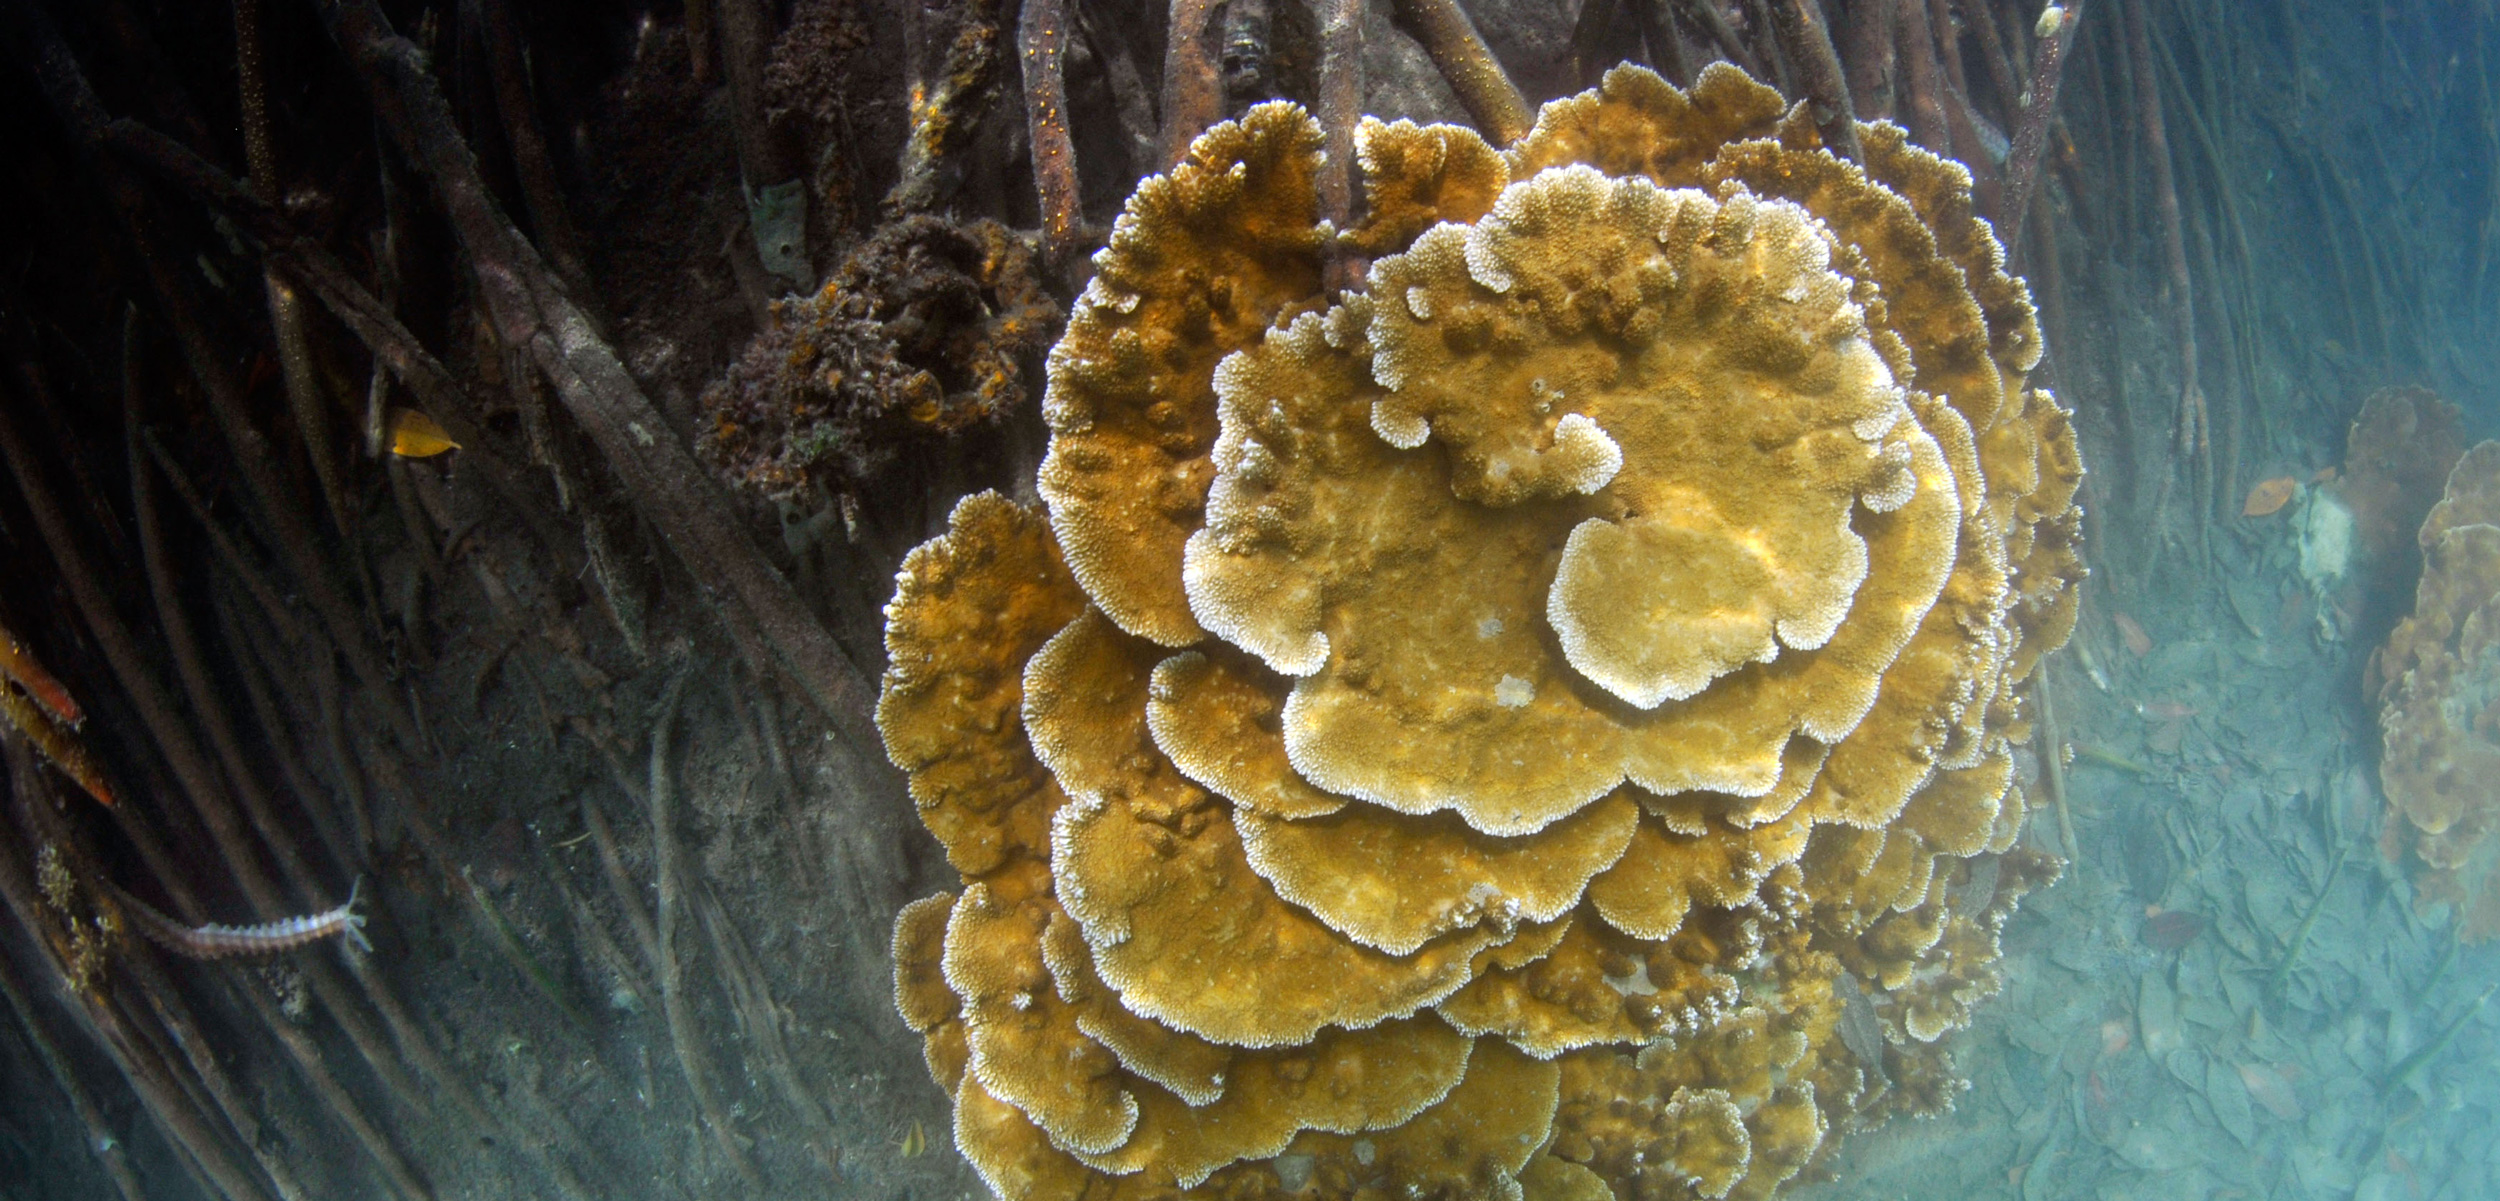 Rice coral, Montipora captata, in the mangrove roots